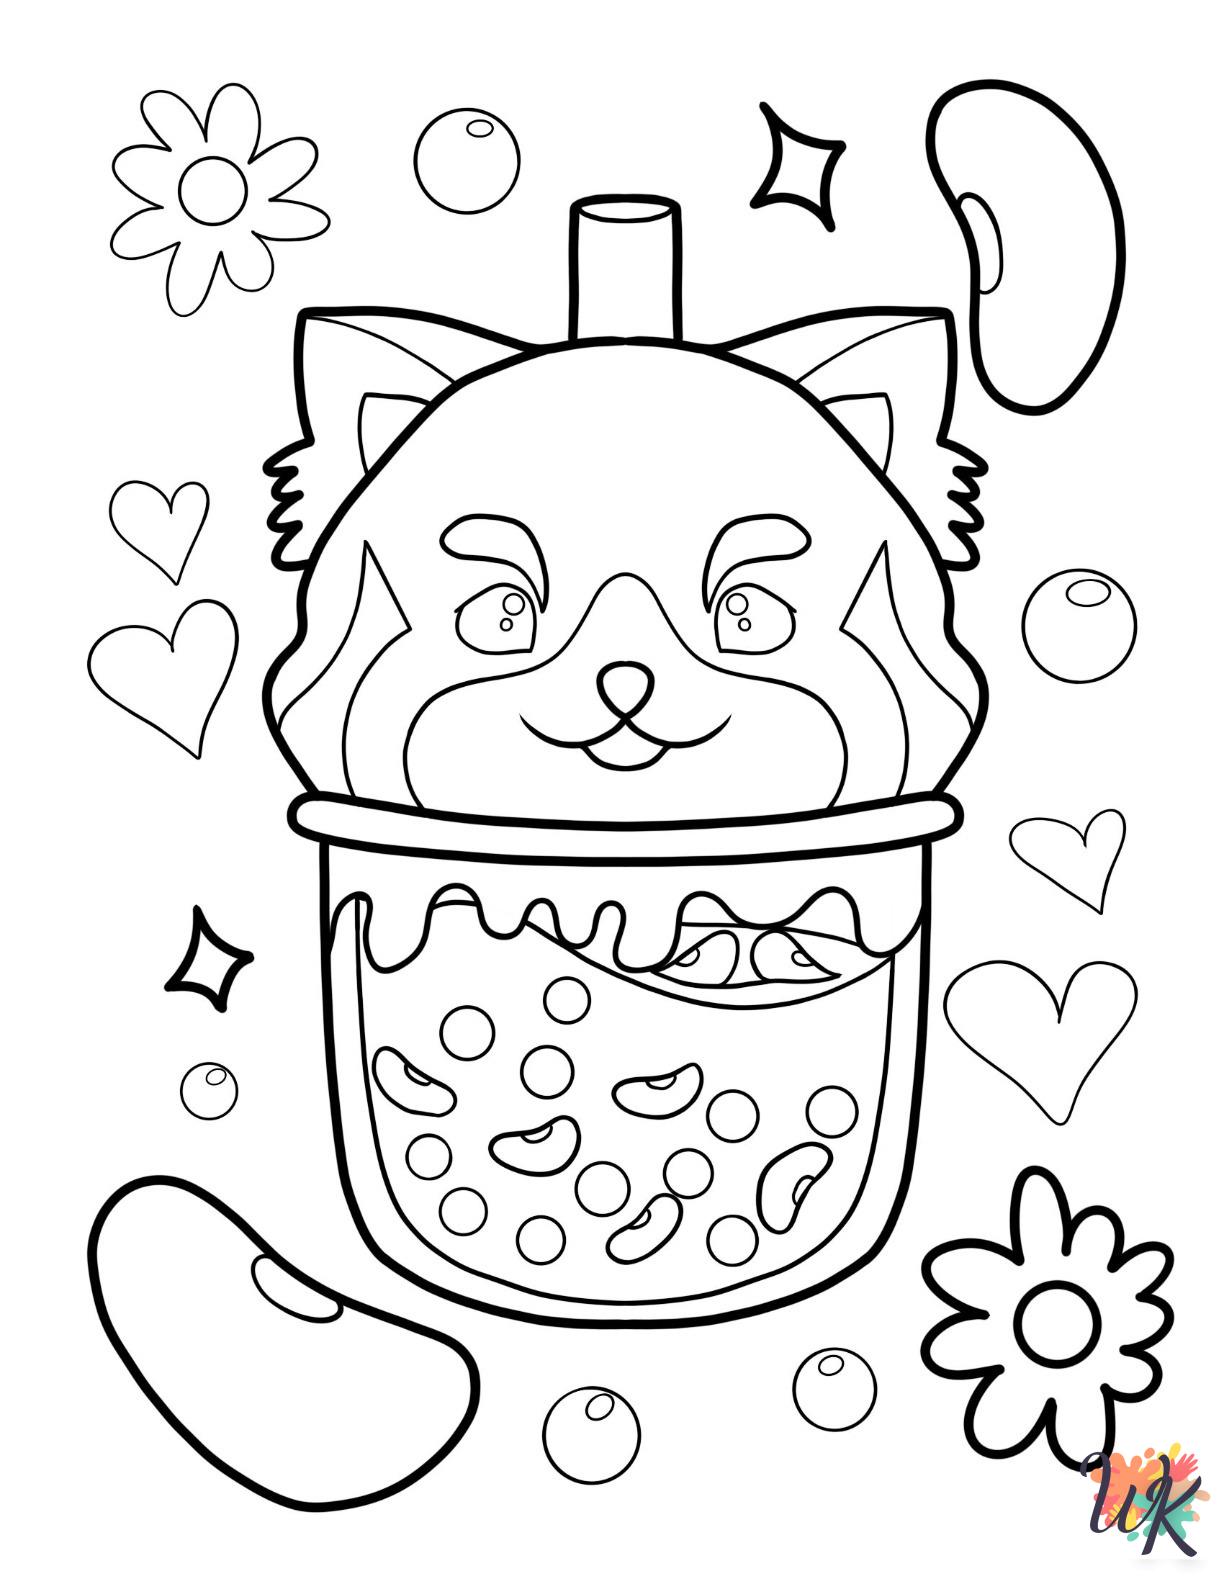 printable Boba Tea coloring pages for adults